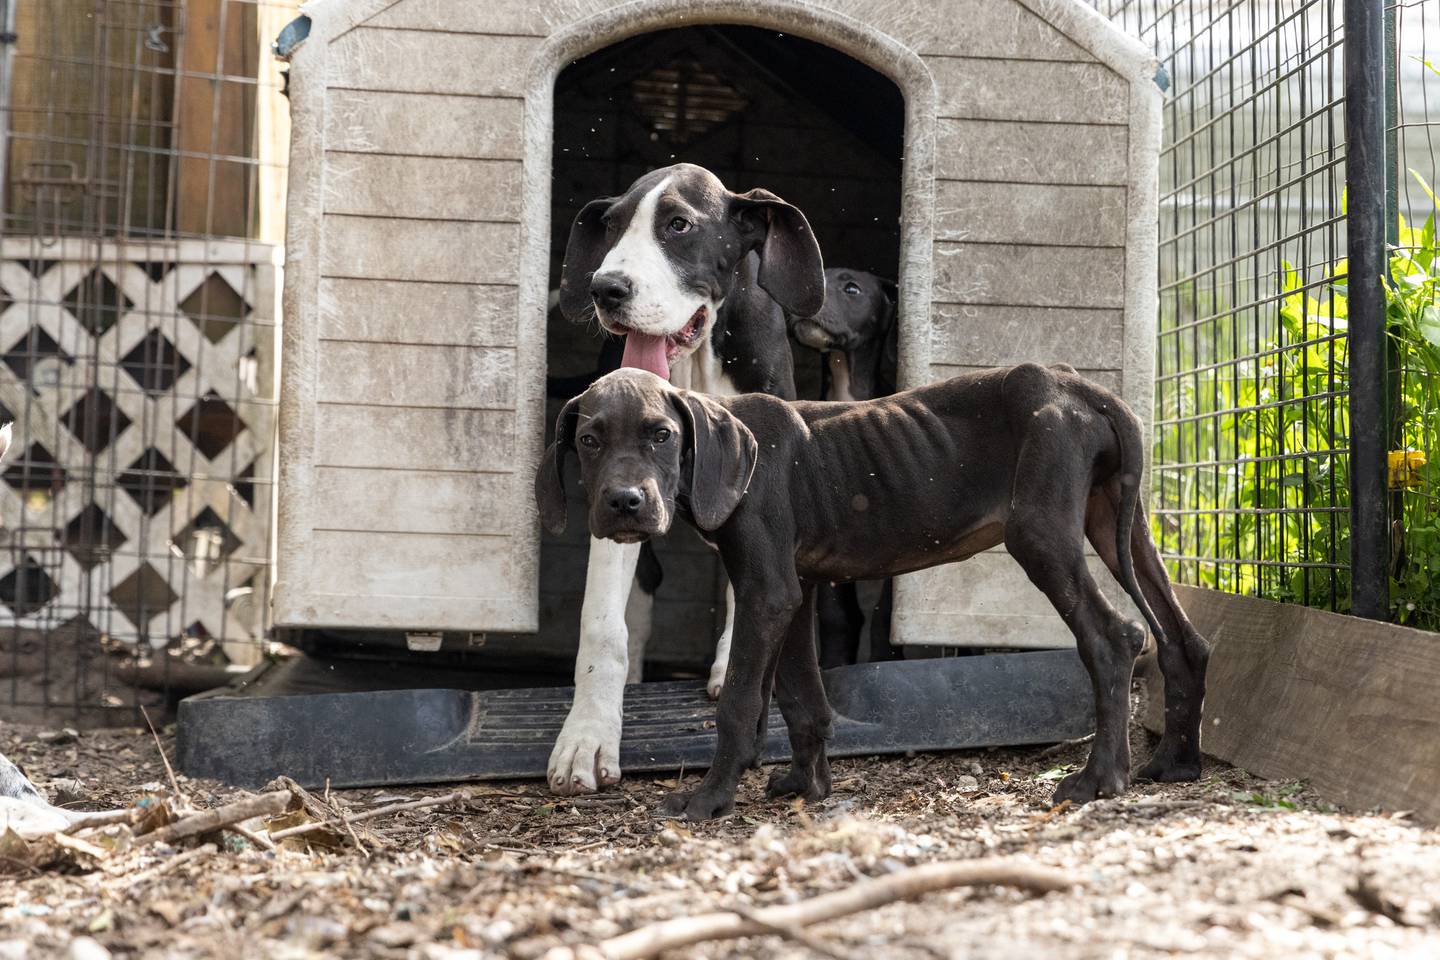 Union County Sheriff’s Office and ASPCA, partnering to remove mistreated dogs – primarily Great Danes – after they were observed living in extremely unsanitary conditions.